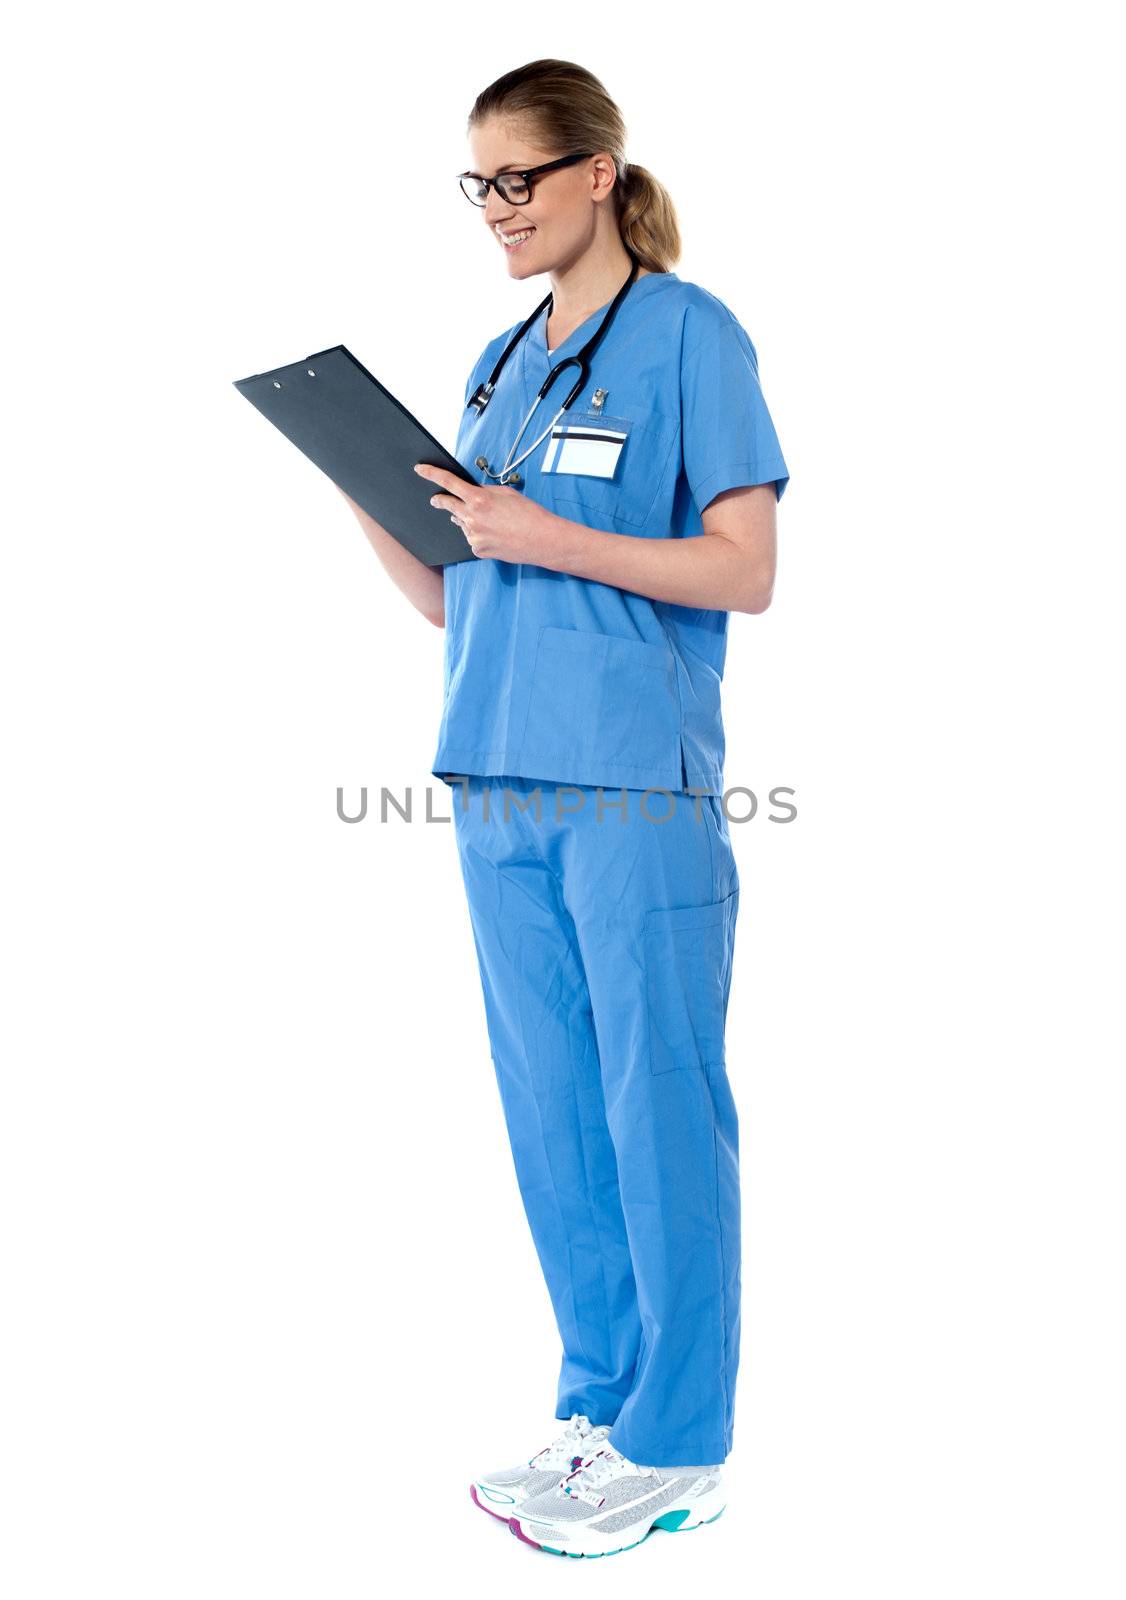 Female surgeon with stethoscope, reading report by stockyimages